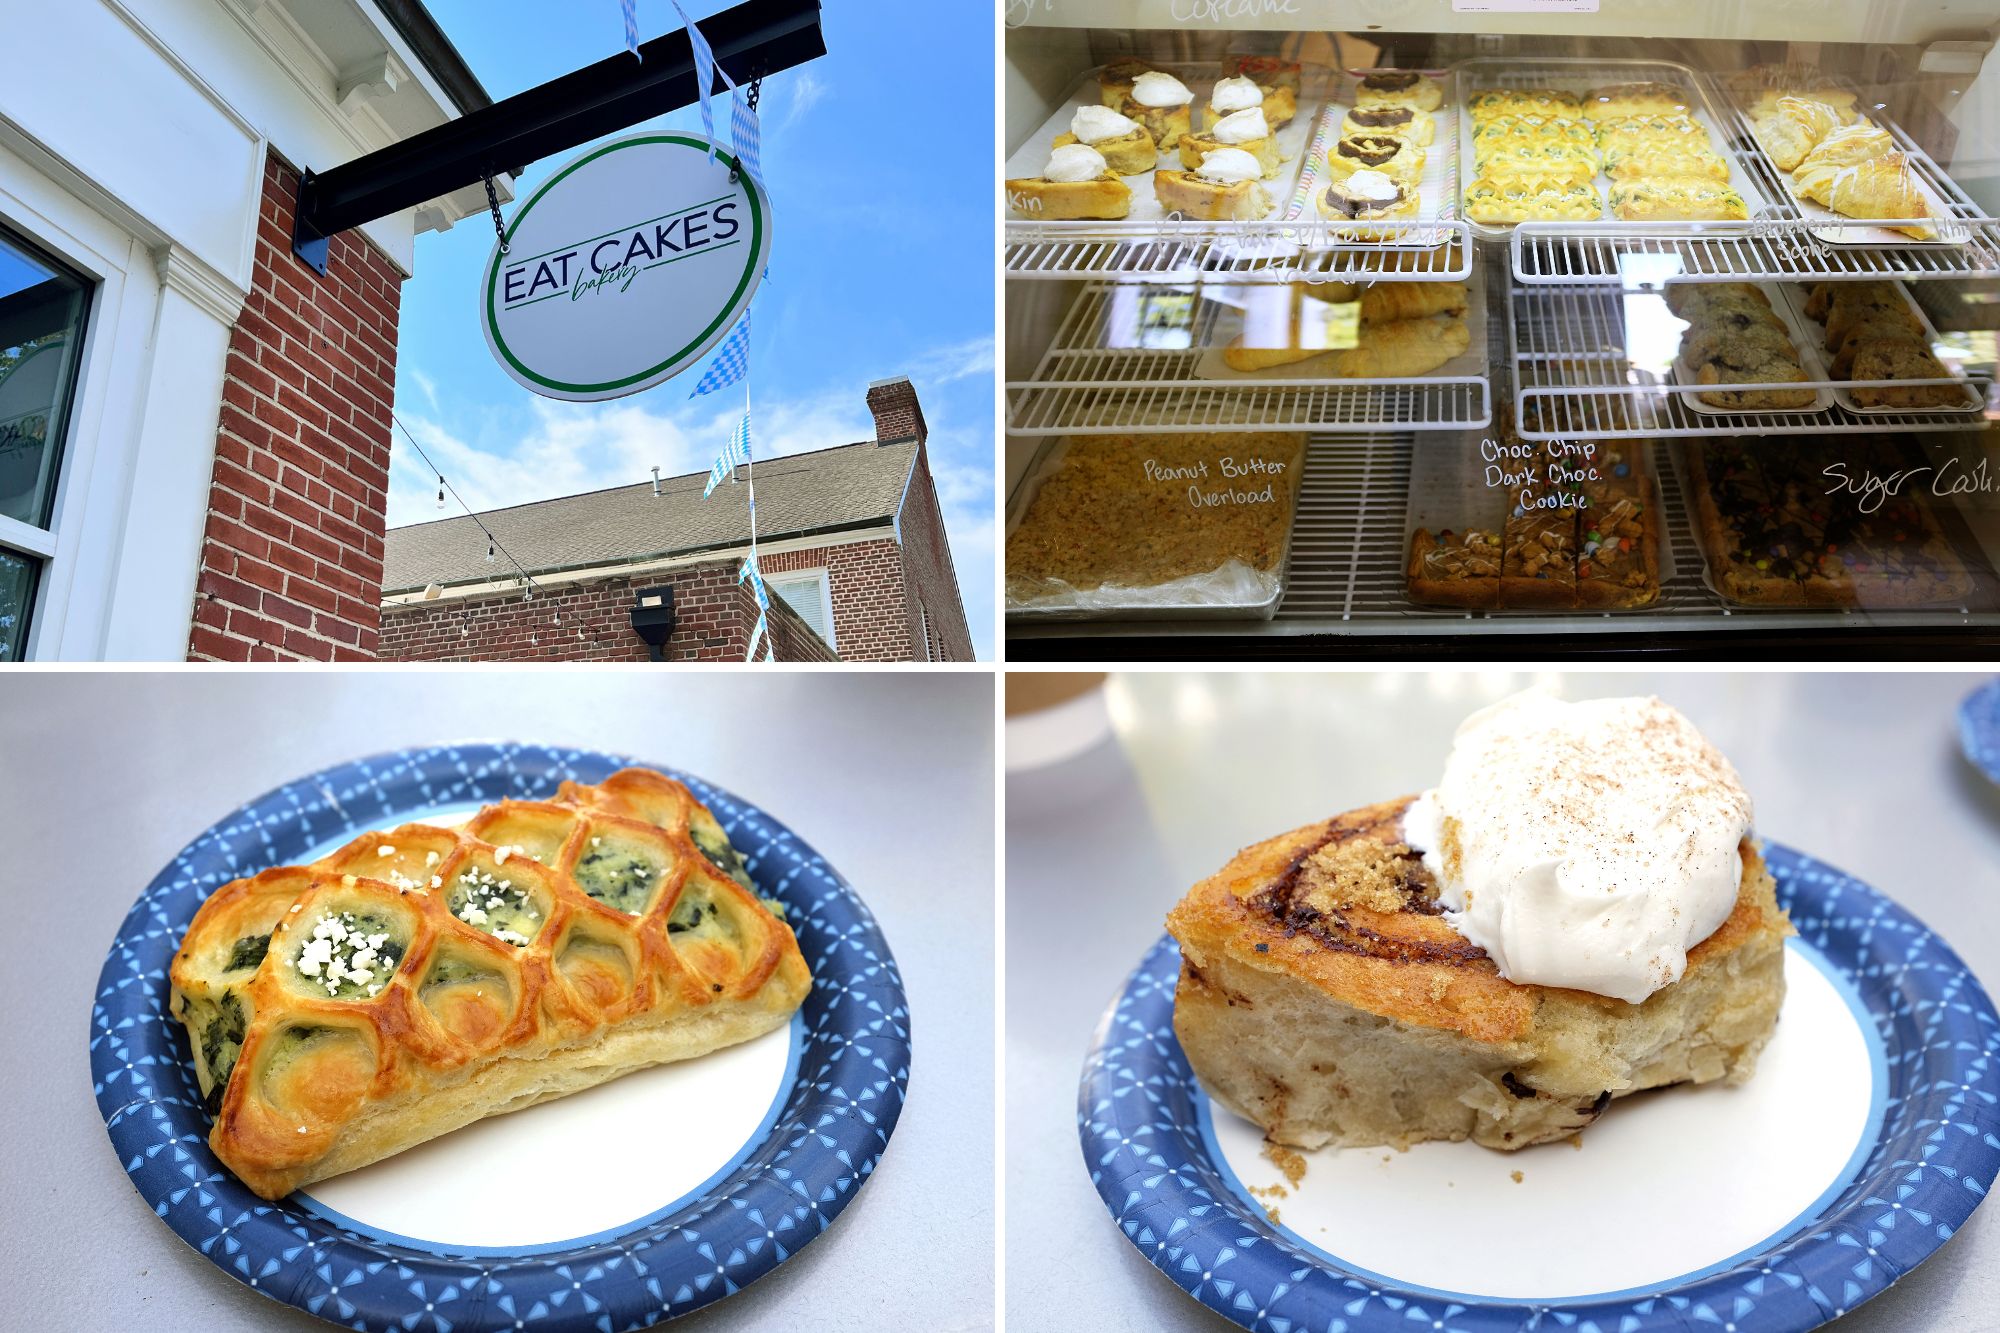 Collage of images from Eat Cakes: the sign, pastry case, and two pastries